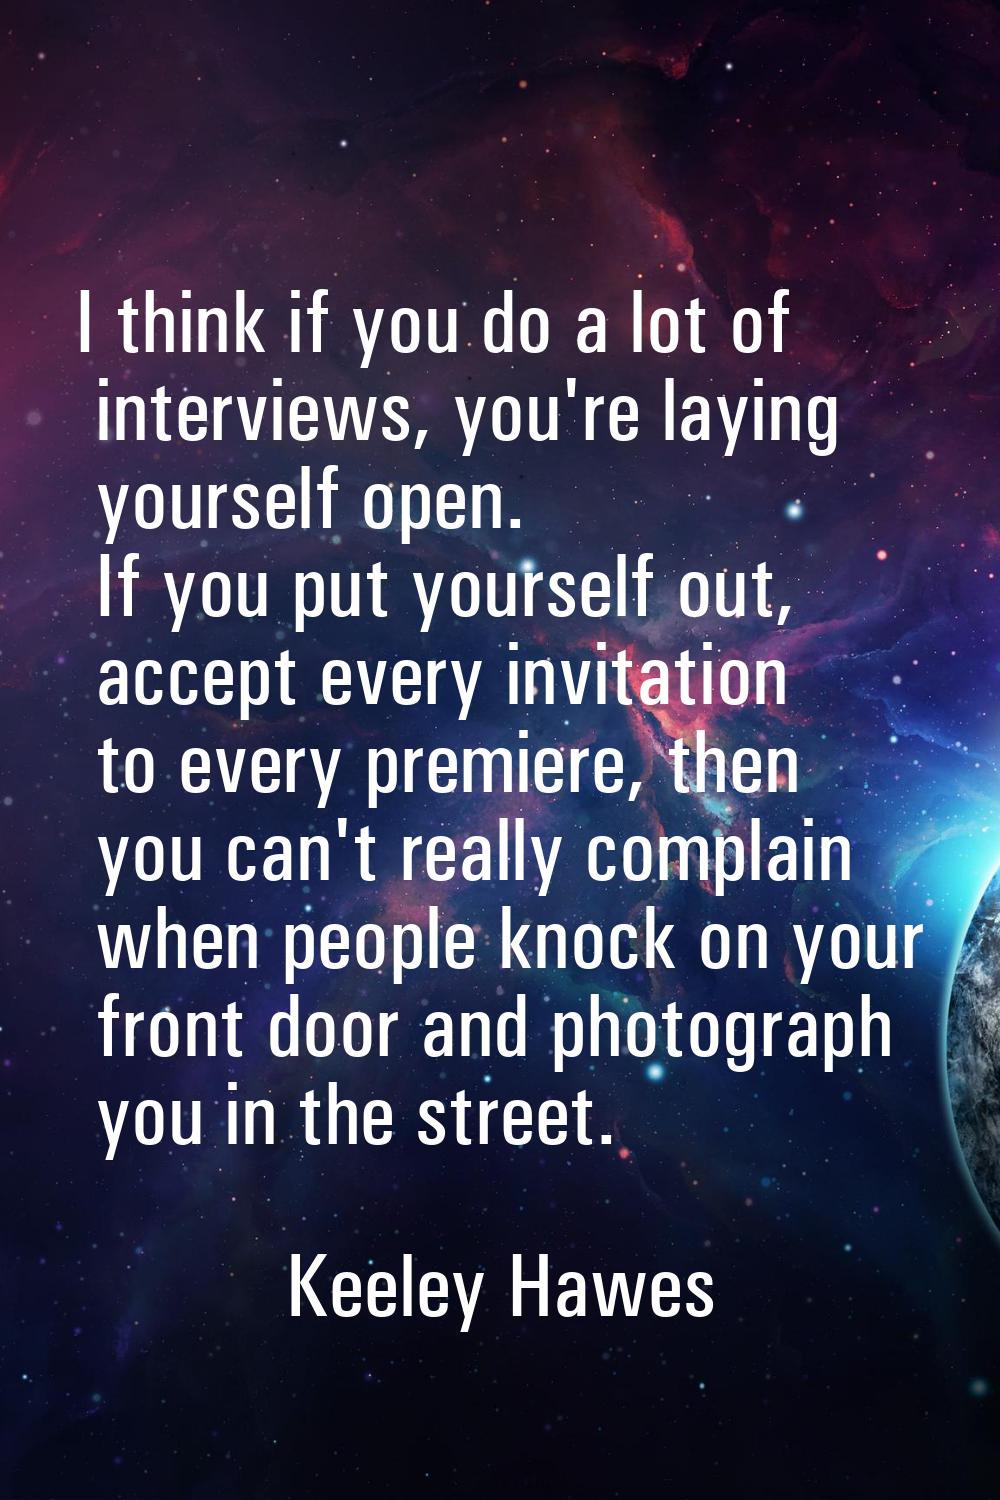 I think if you do a lot of interviews, you're laying yourself open. If you put yourself out, accept